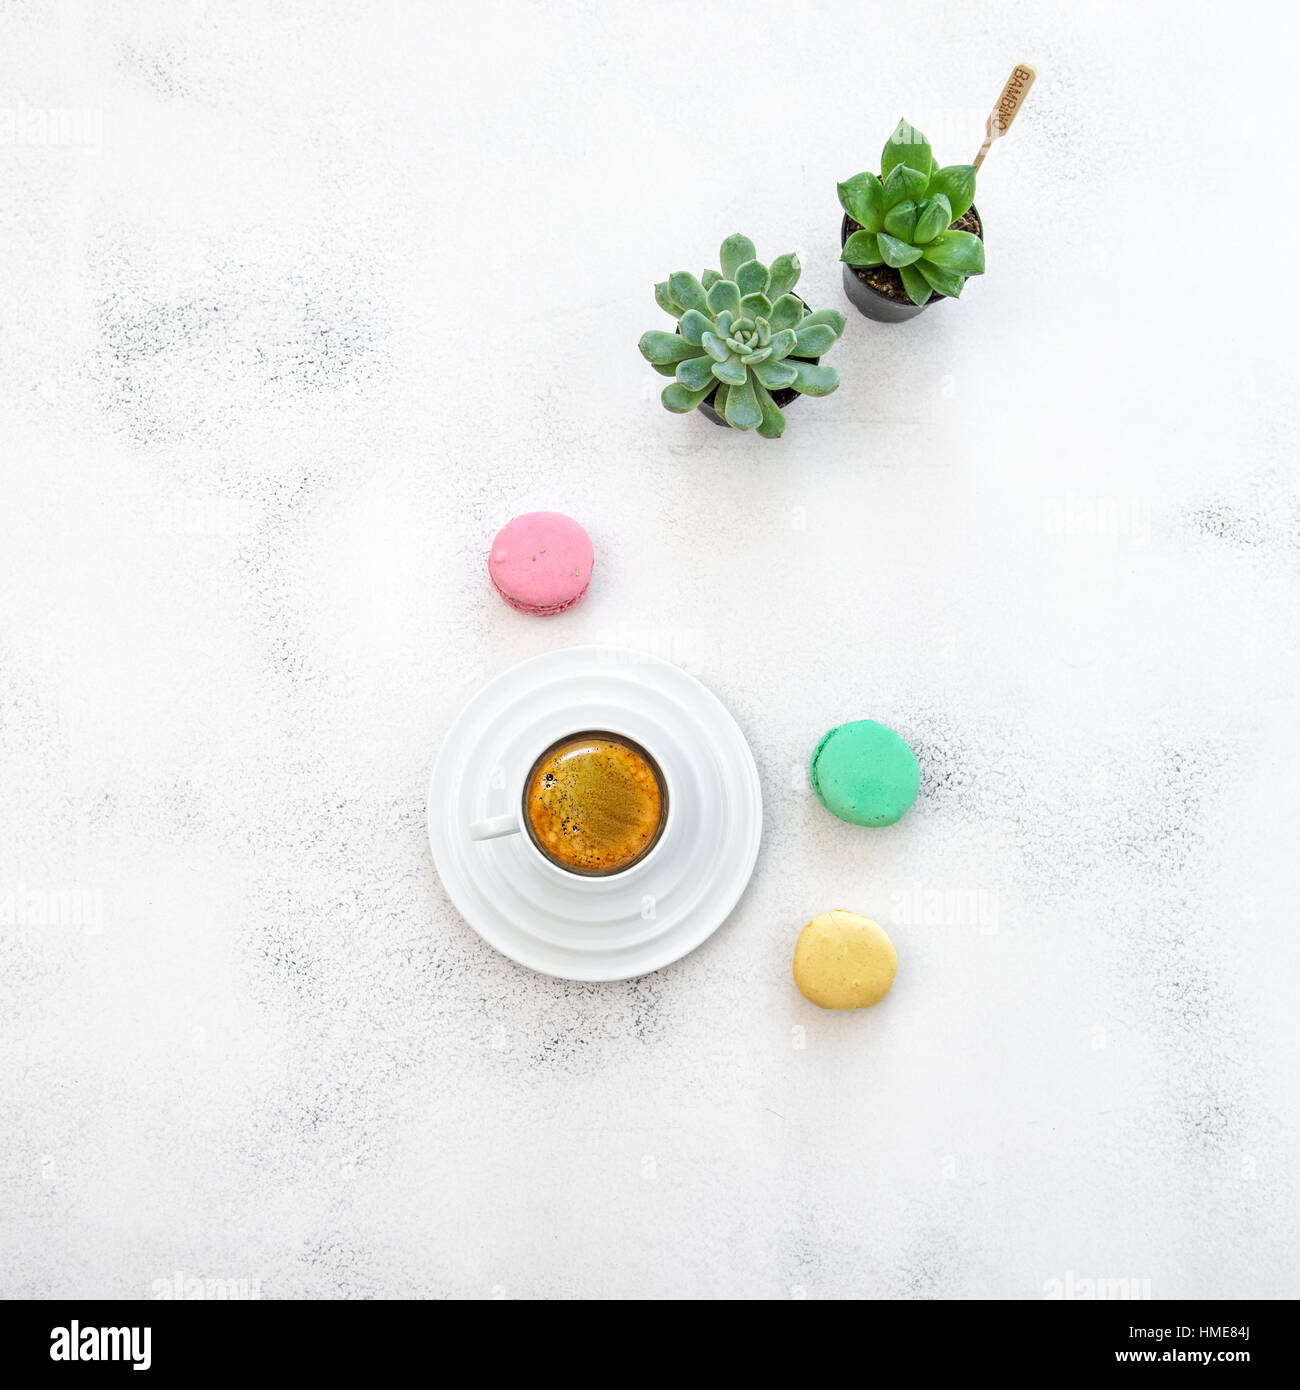 Coffee, macarons cookies, succulent plants on white table background. Flat lay Stock Photo